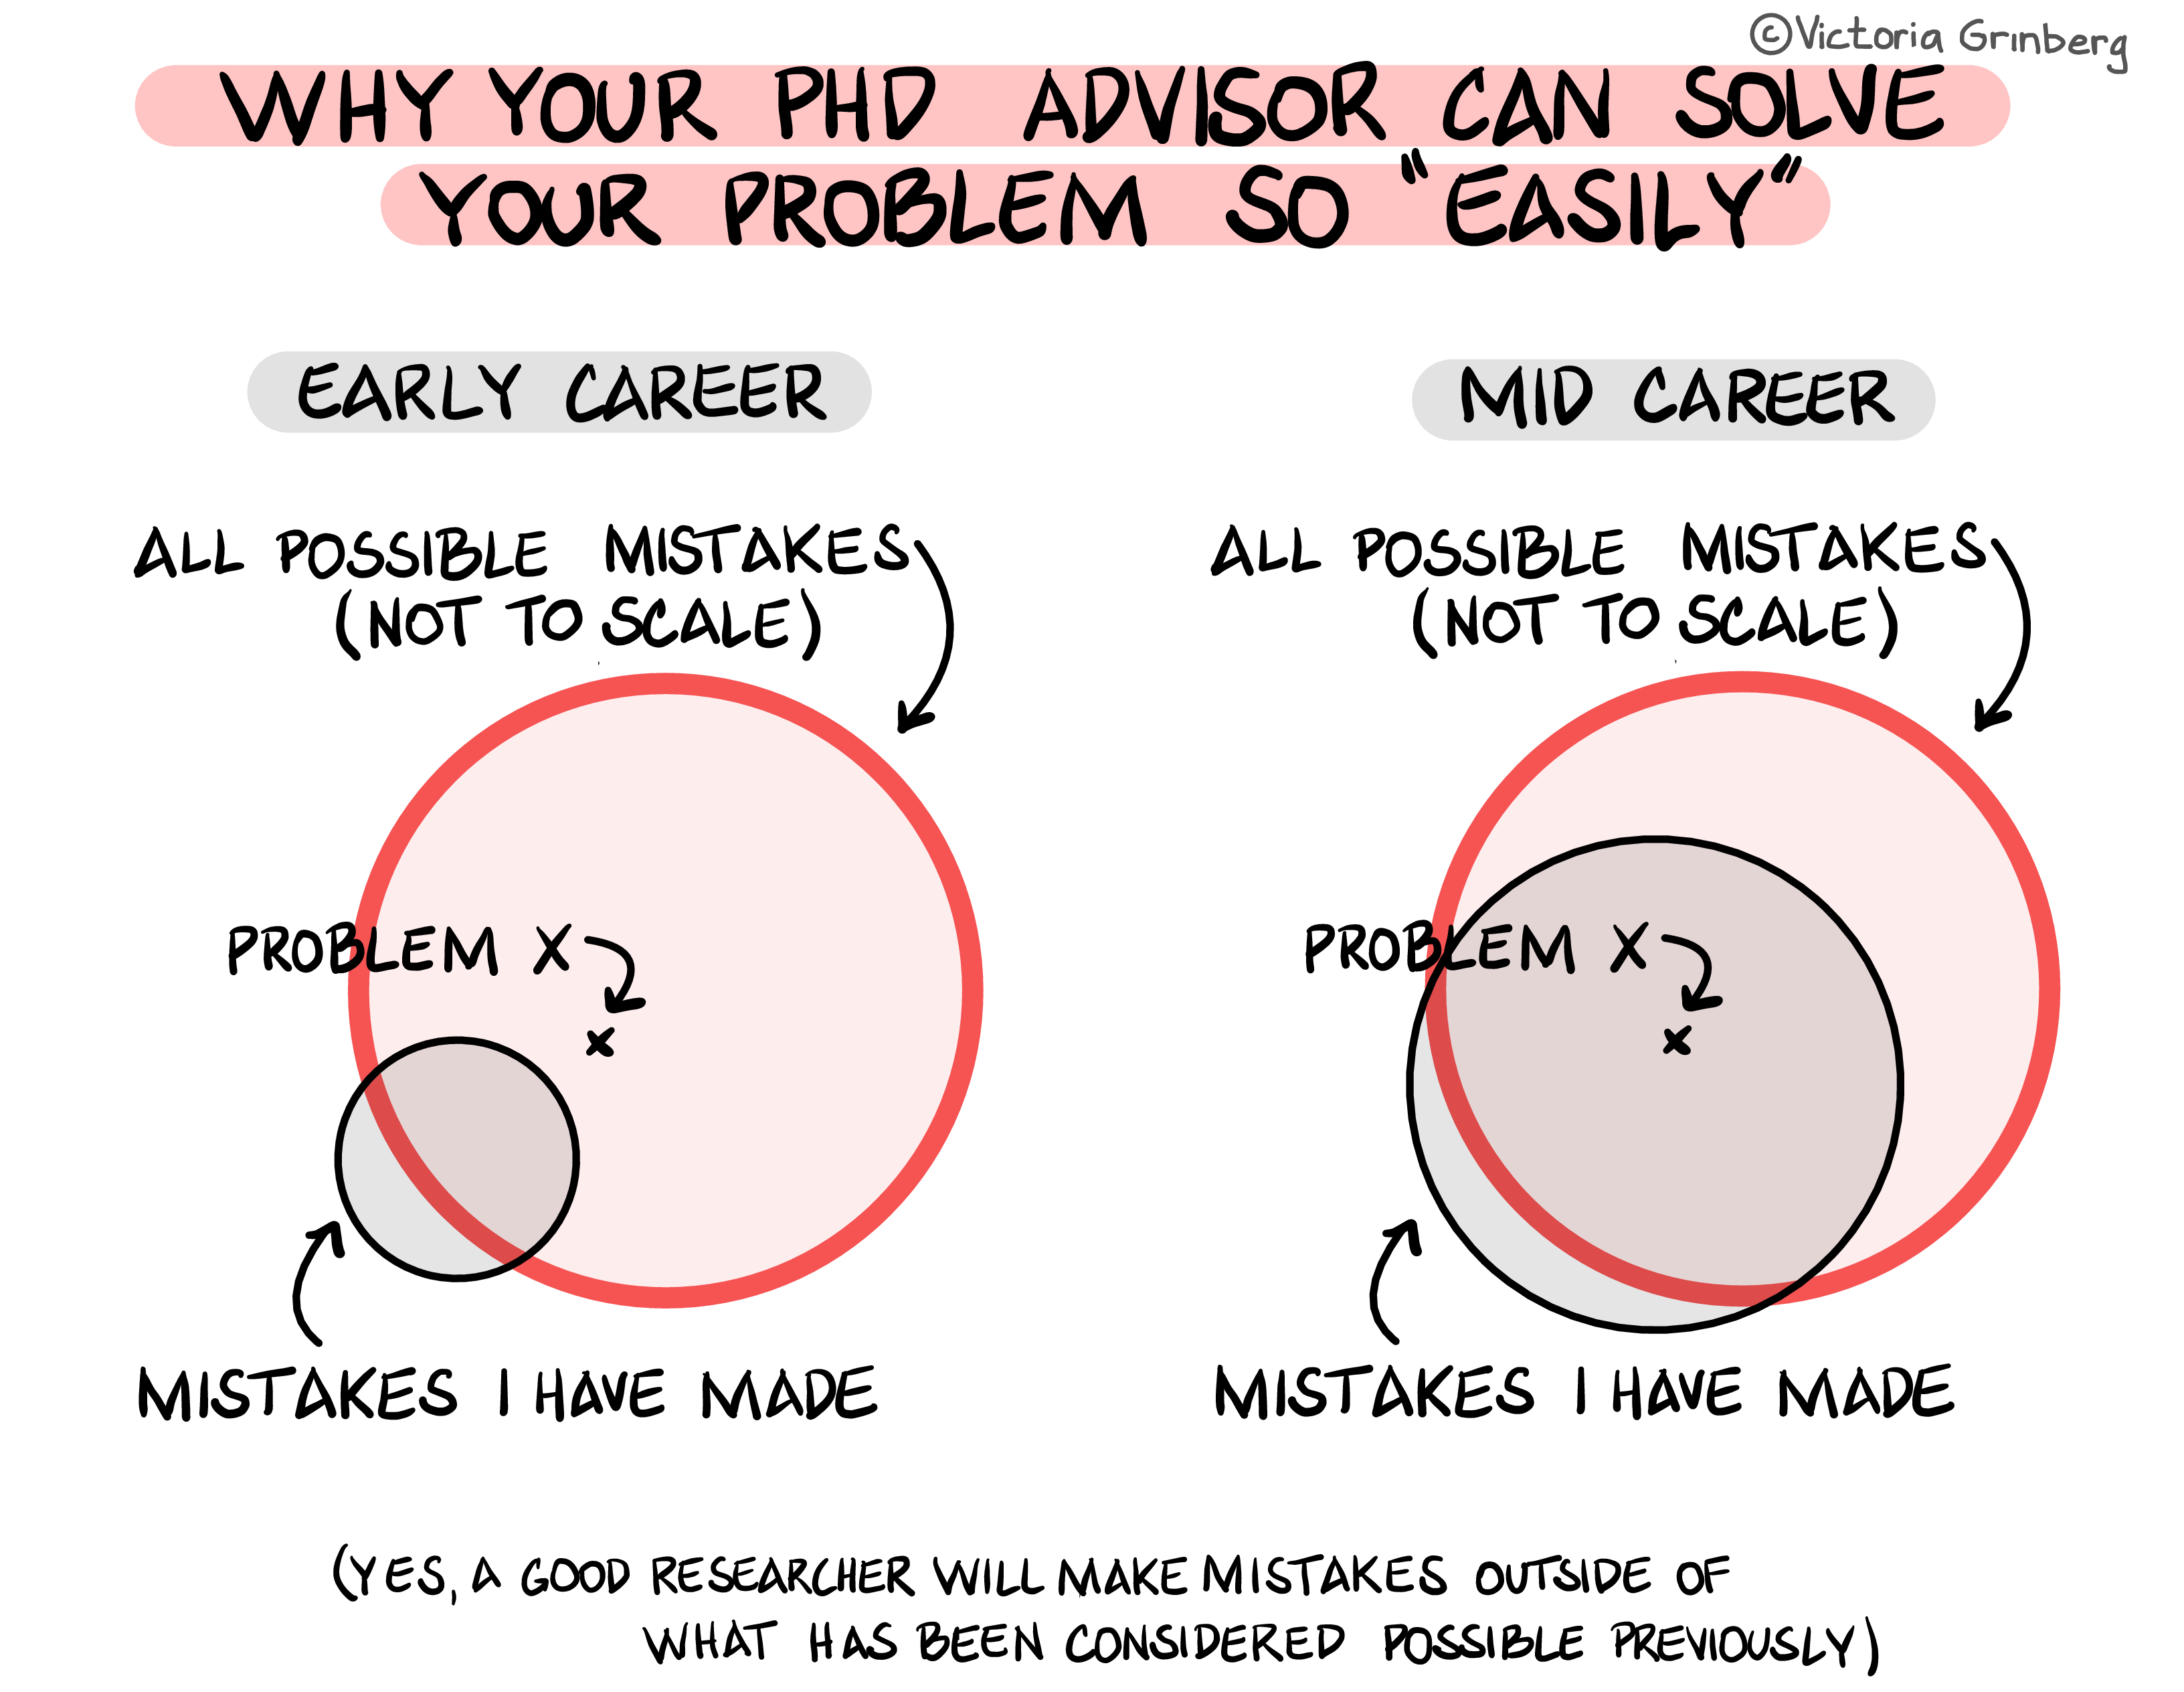 Black, white and red digital drawing titled 'Why you PhD advisor can solve your problem so 'easily''. The drawing is showing two Venn diagrams, one titled 'early career' shows a large circle of all possible mistakes (not to scale) and a small circle called 'mistakes I made', that does not encompass a cross labelled 'problem'. The second, titled 'mid career' shows the same circles, but the 'mistaked I have made' is now much larger, encompassing the problem cross. Neither of the 'mistakes I made' circle fully overlapw with the 'all possible mistakes' circles and at the bottom of the drawing there is a remark saying 'yes, a good researcher will make mistakes outside of what has been considered possible previously'